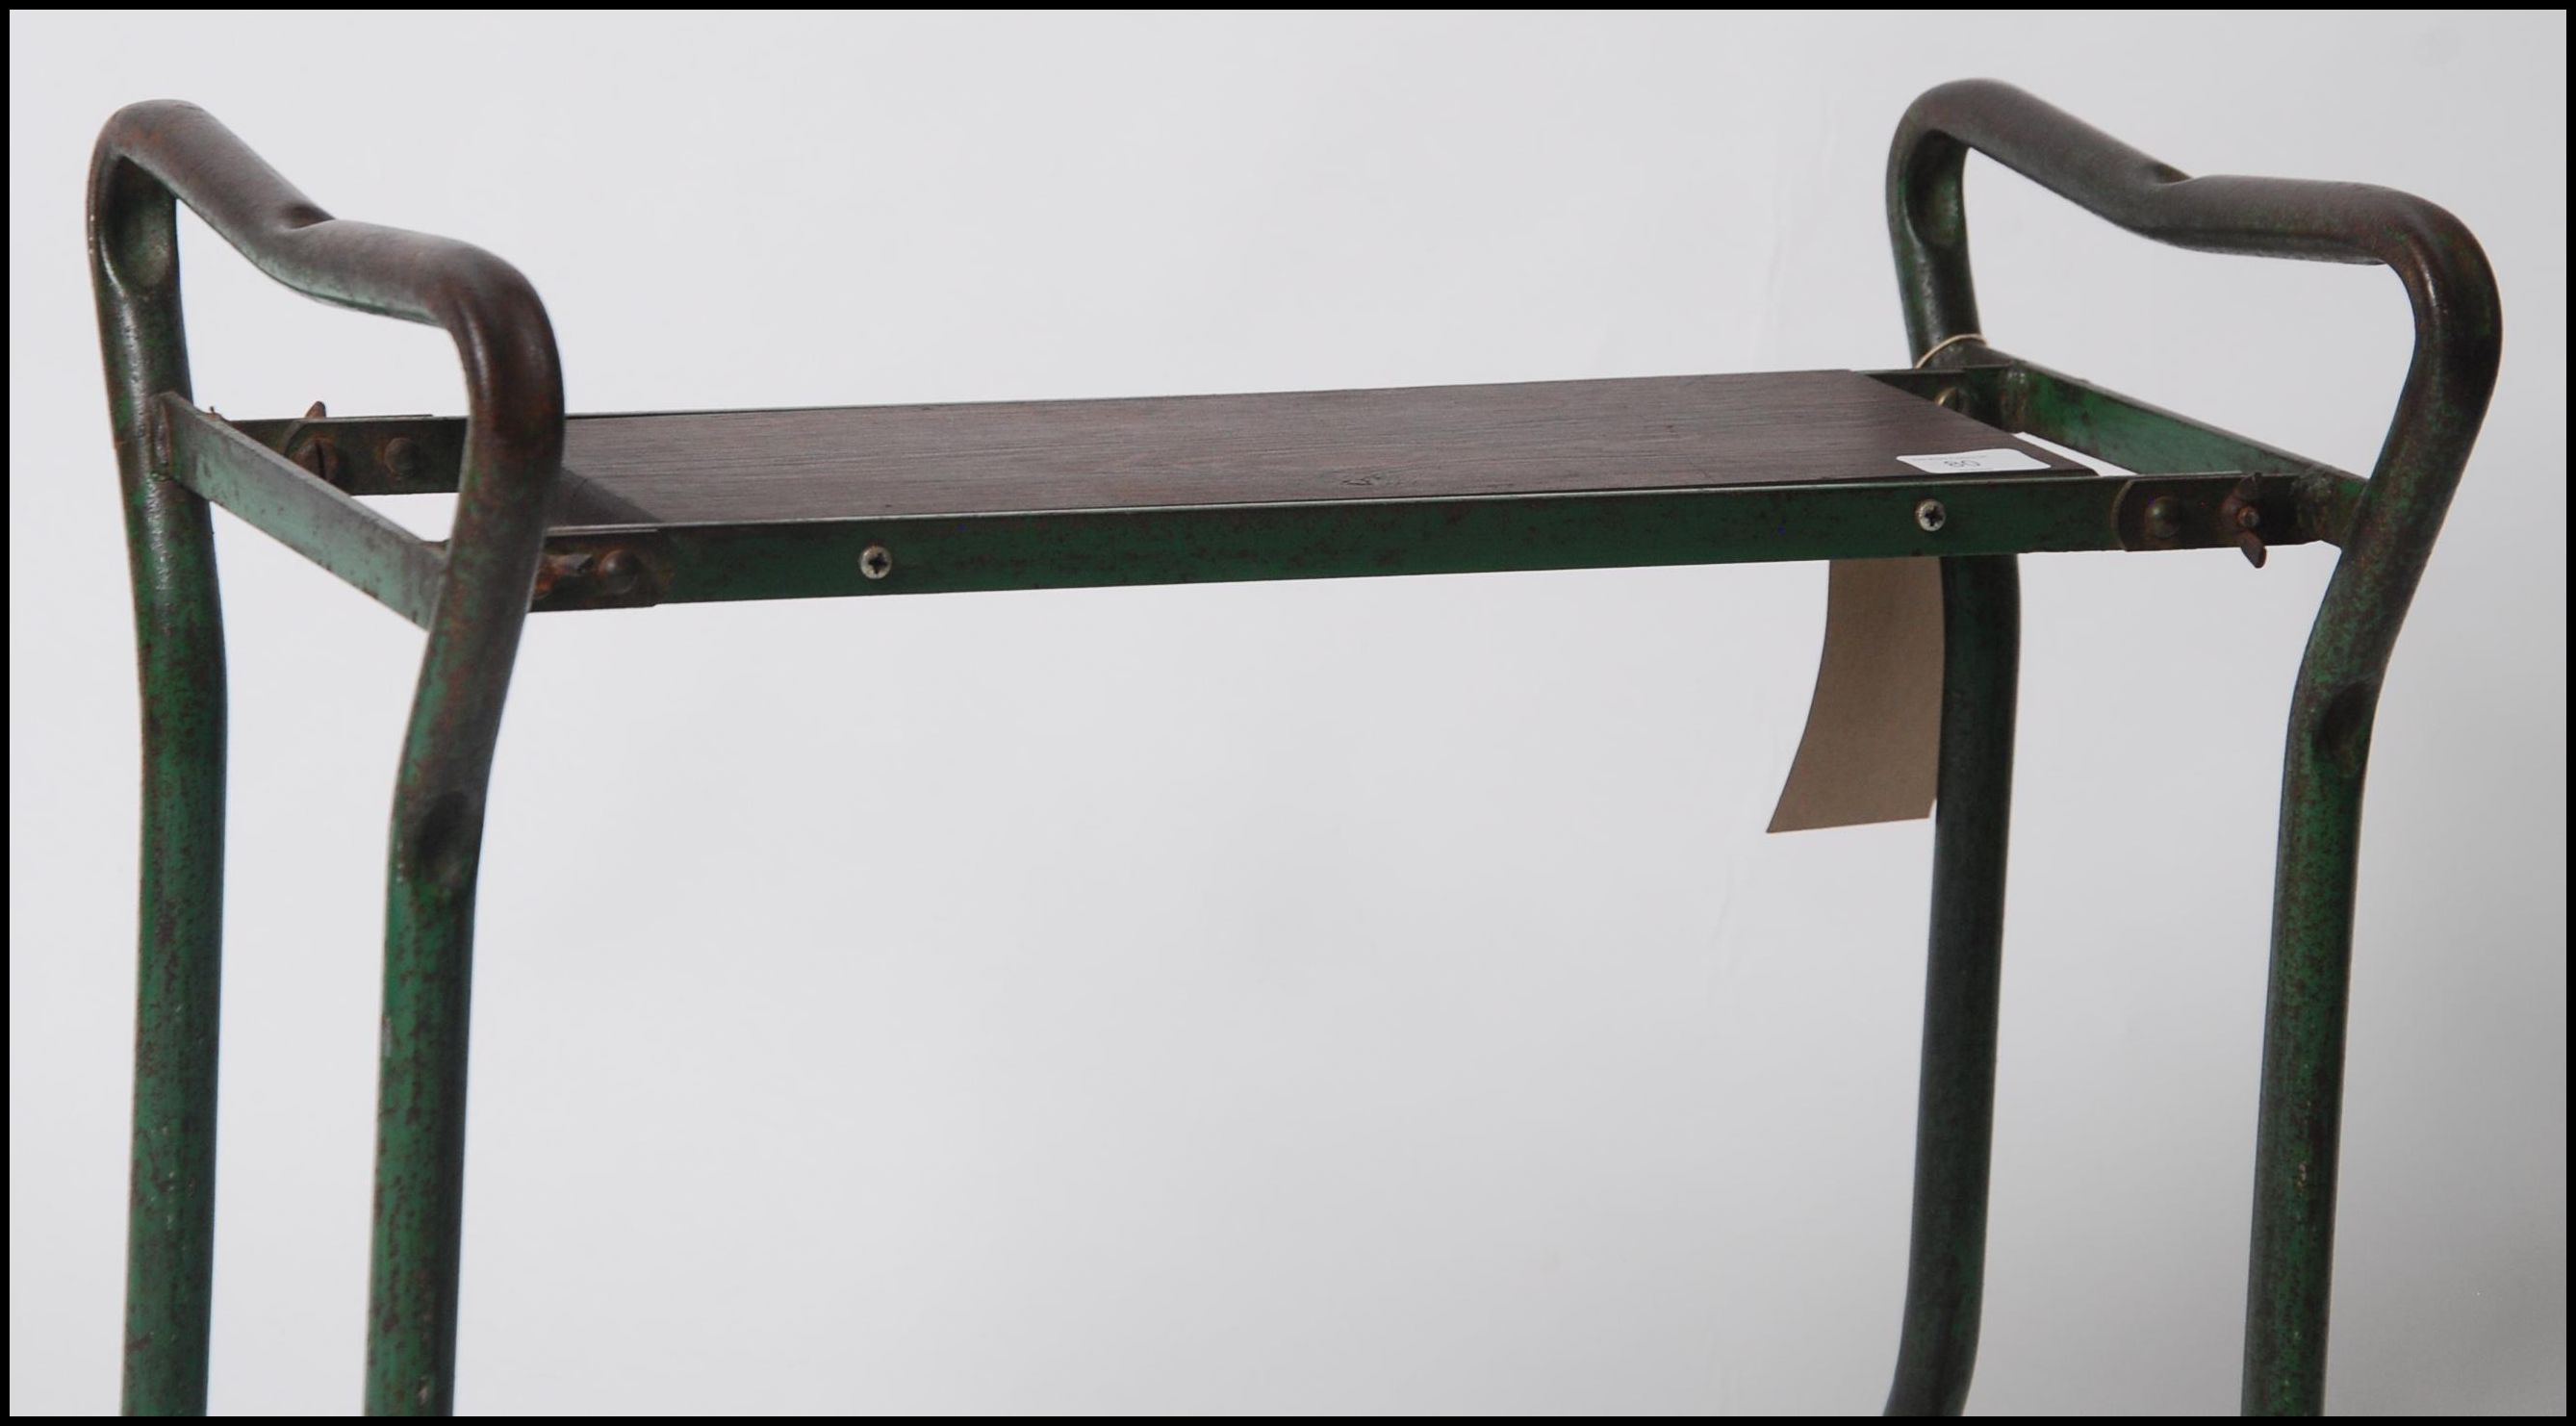 A vintage mid century 1950's tubular metal stool - bench seat having a polished pine plank seat - - Image 3 of 6